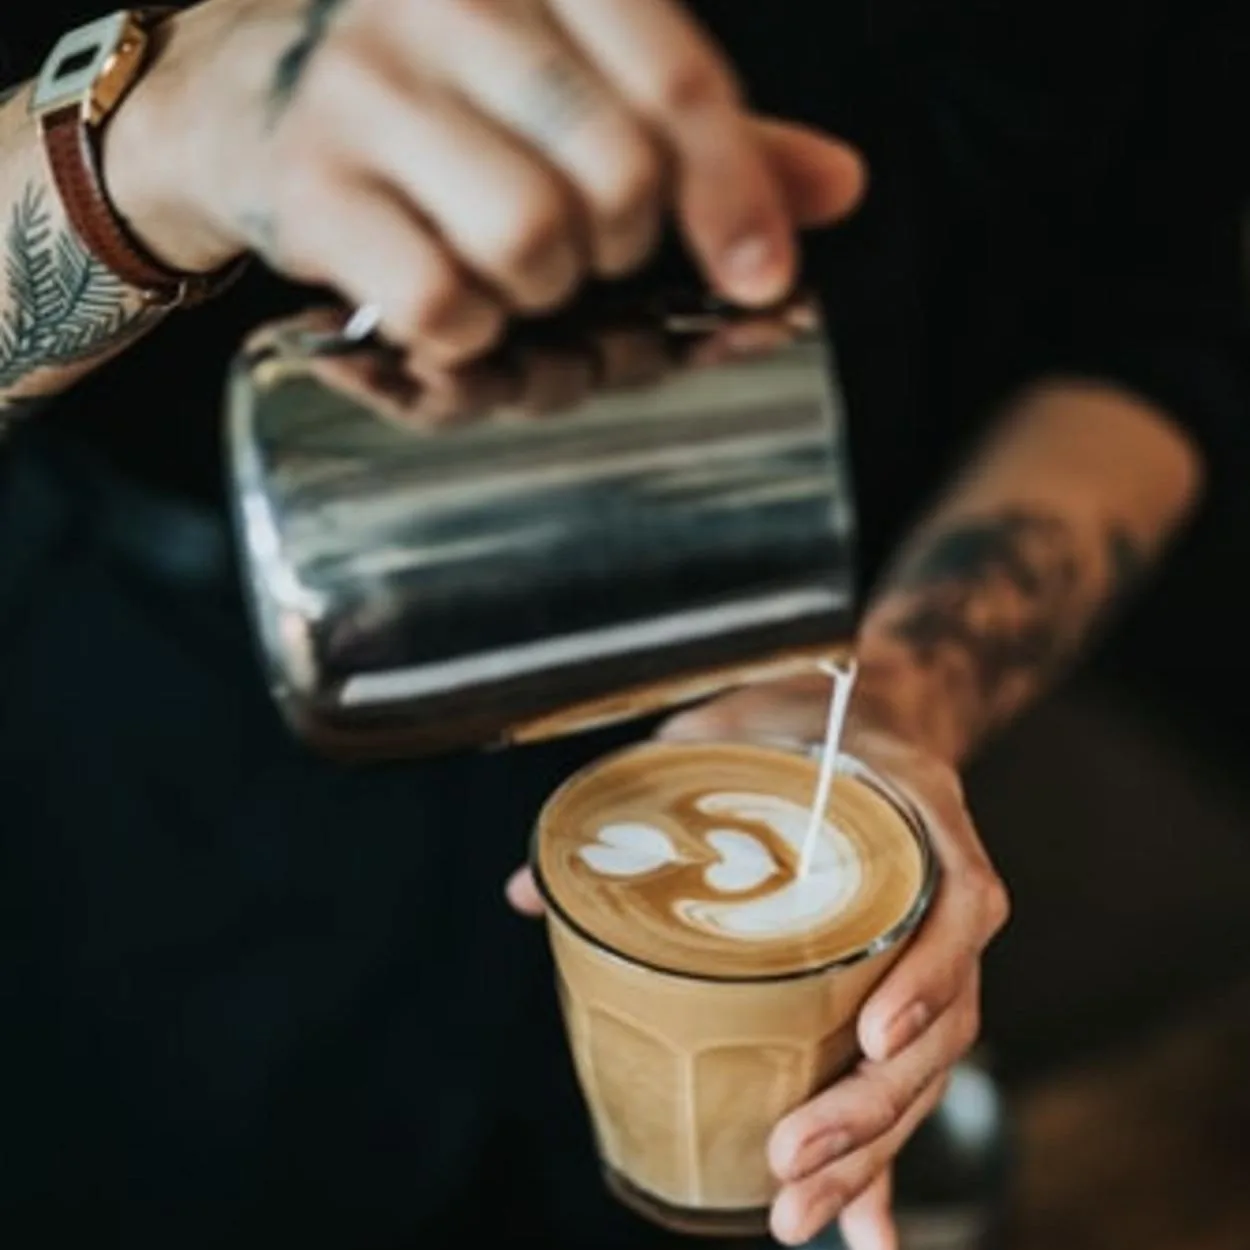 A barista pouring coffee in a cup.